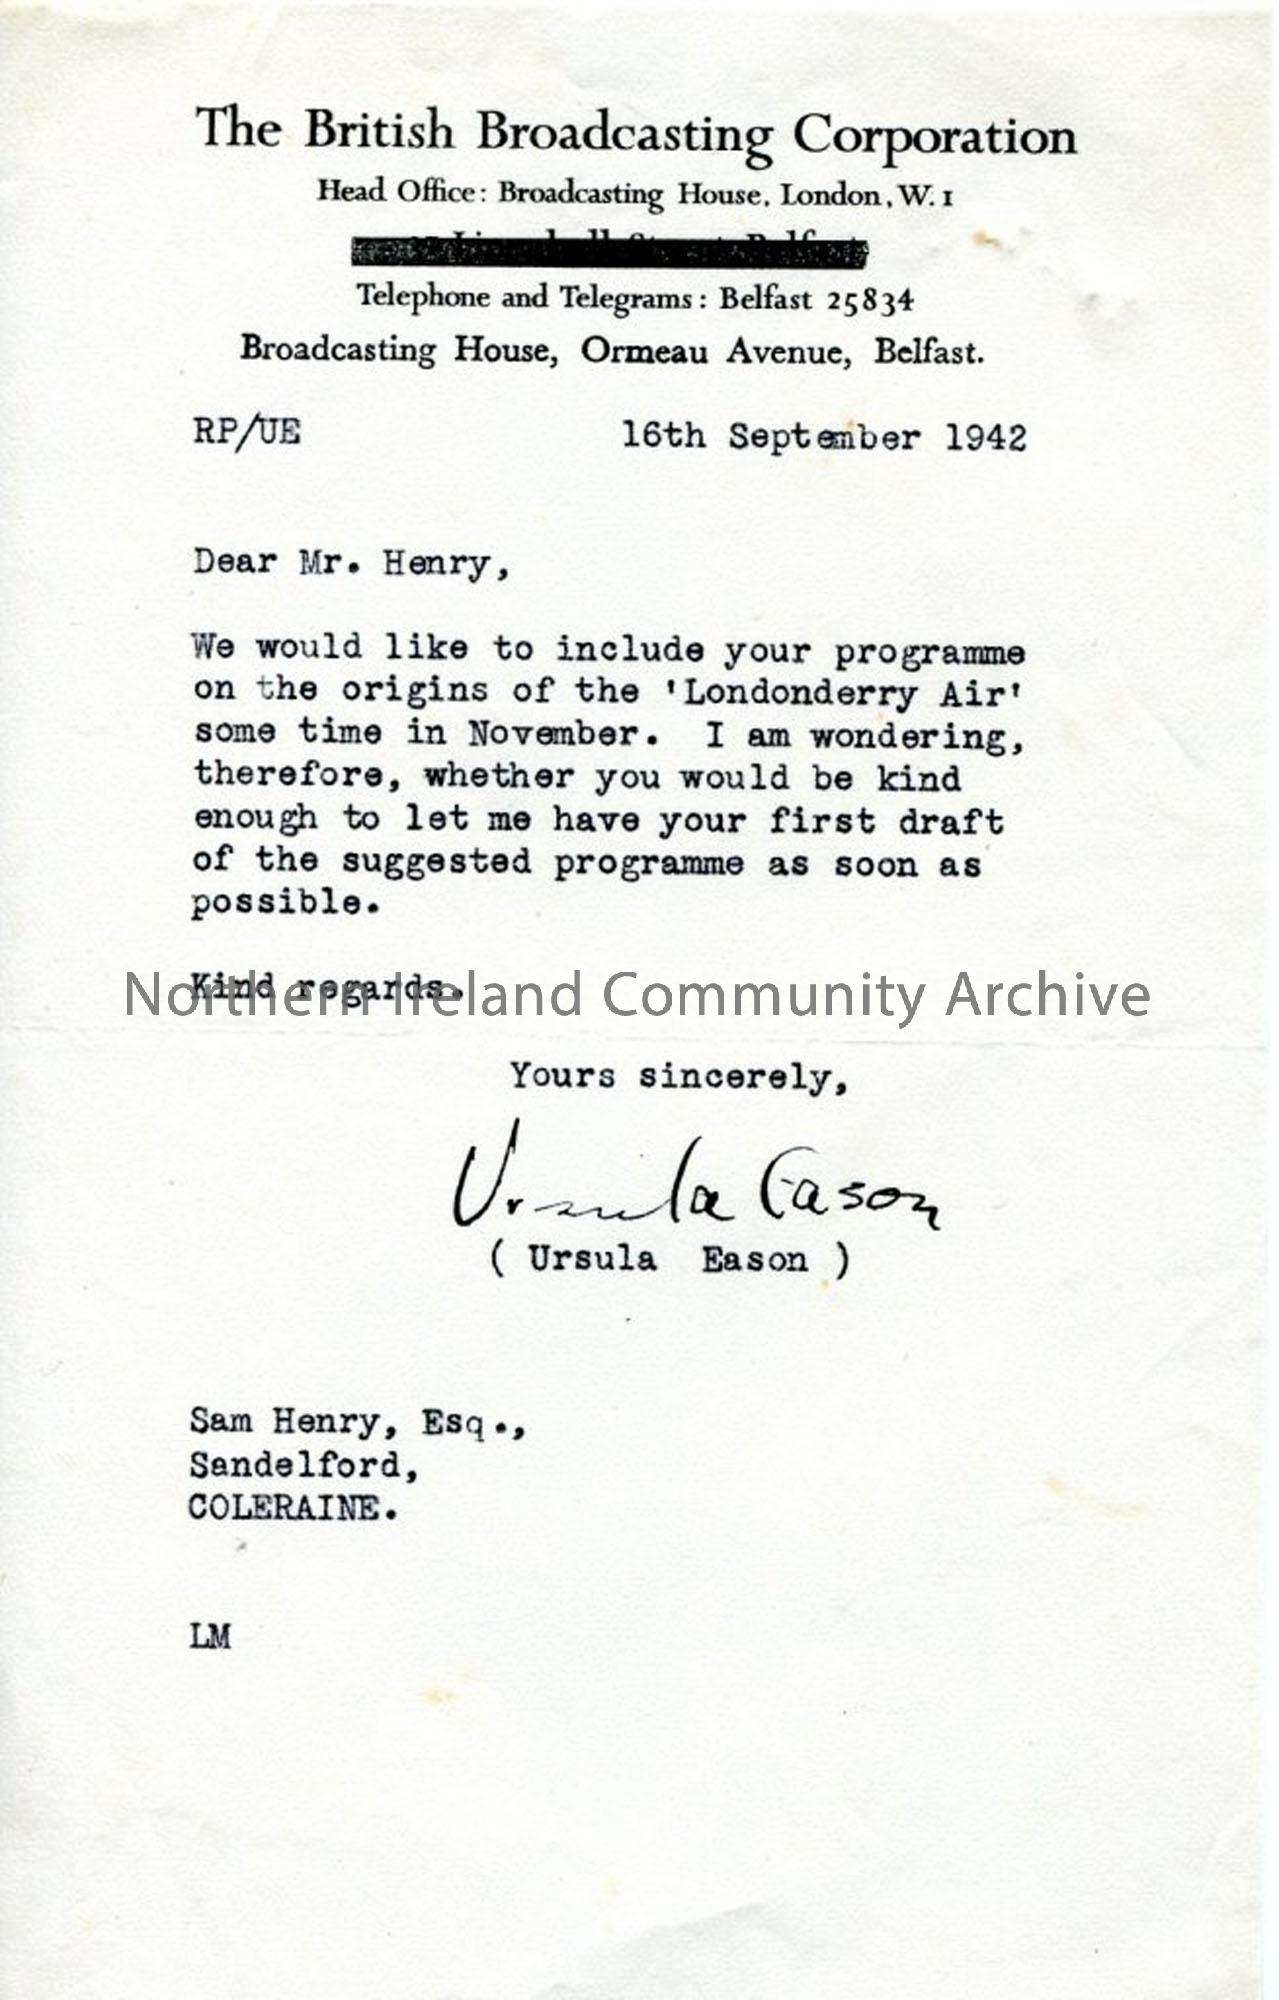 Letter from Ursula Eason of the BBC, 16.9.1942